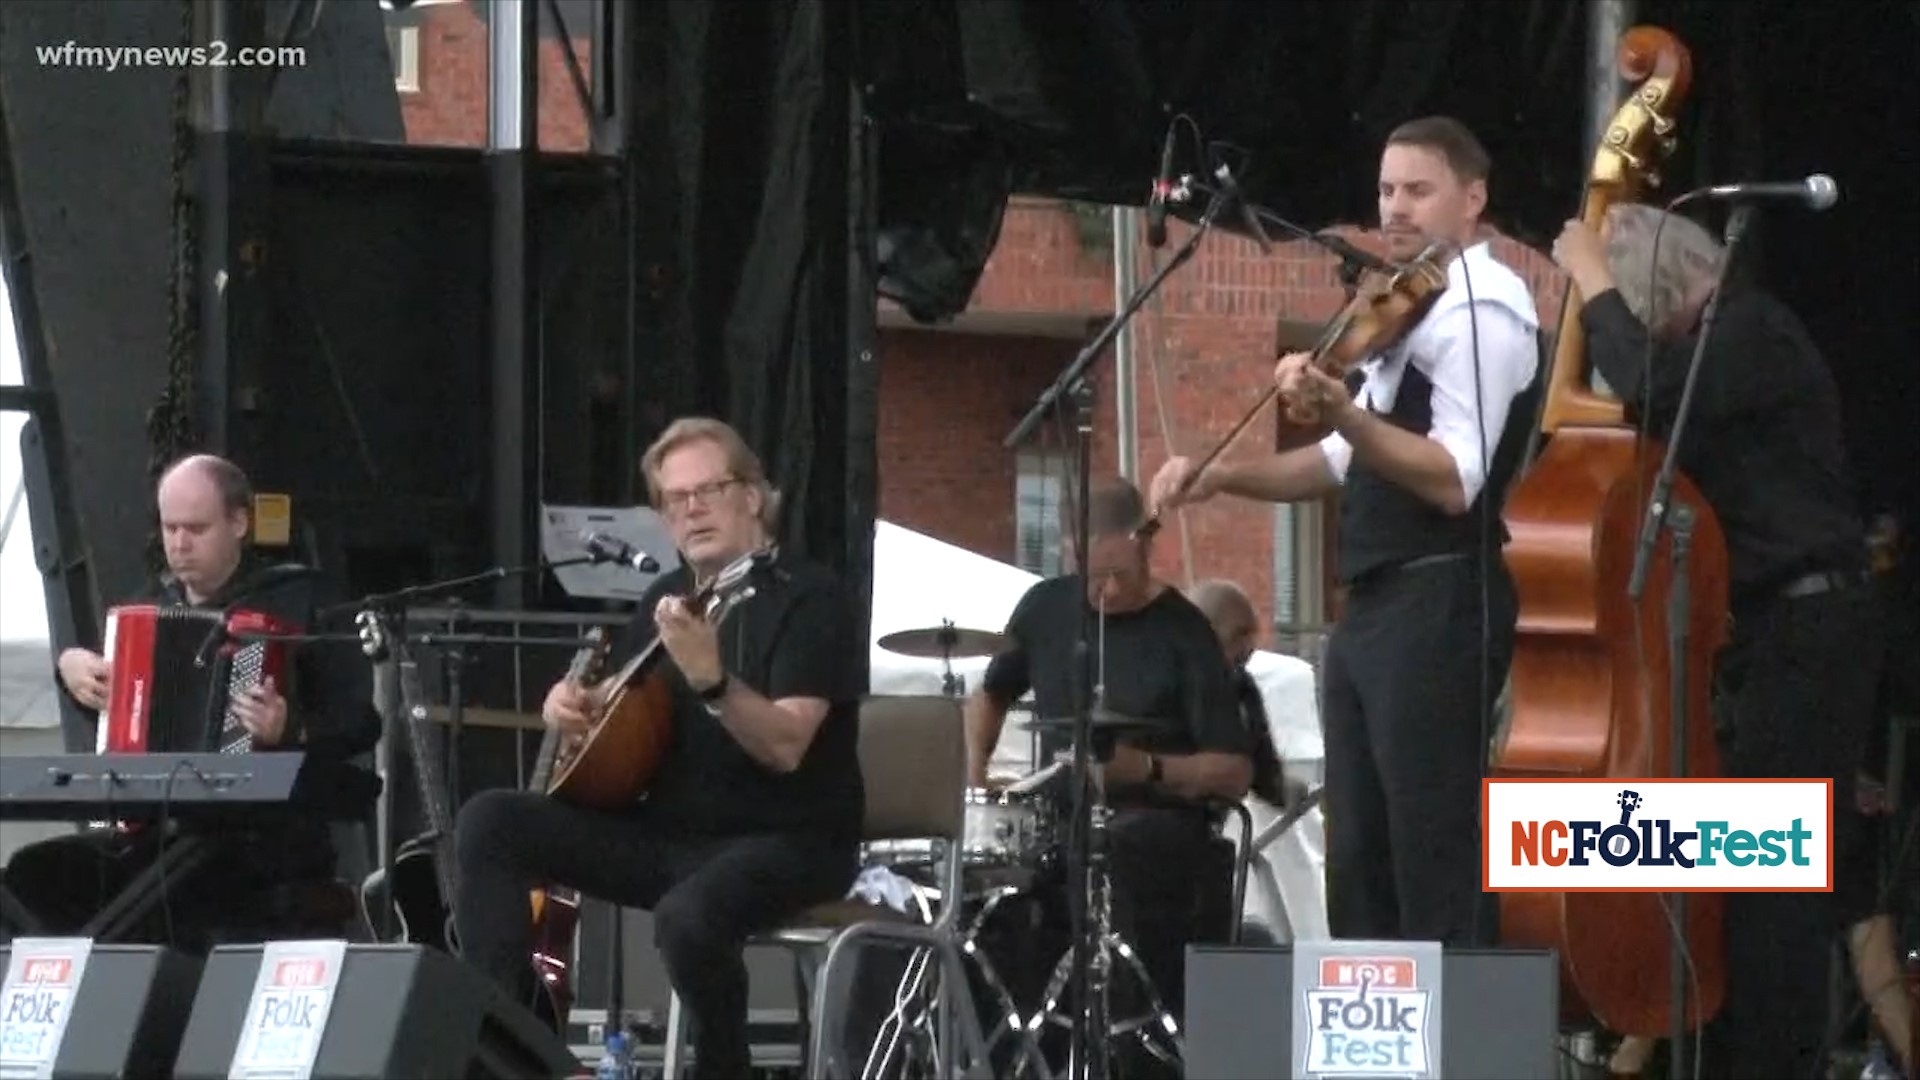 The NC Folk Festival will take place in downtown Greensboro until Sunday, September 8.